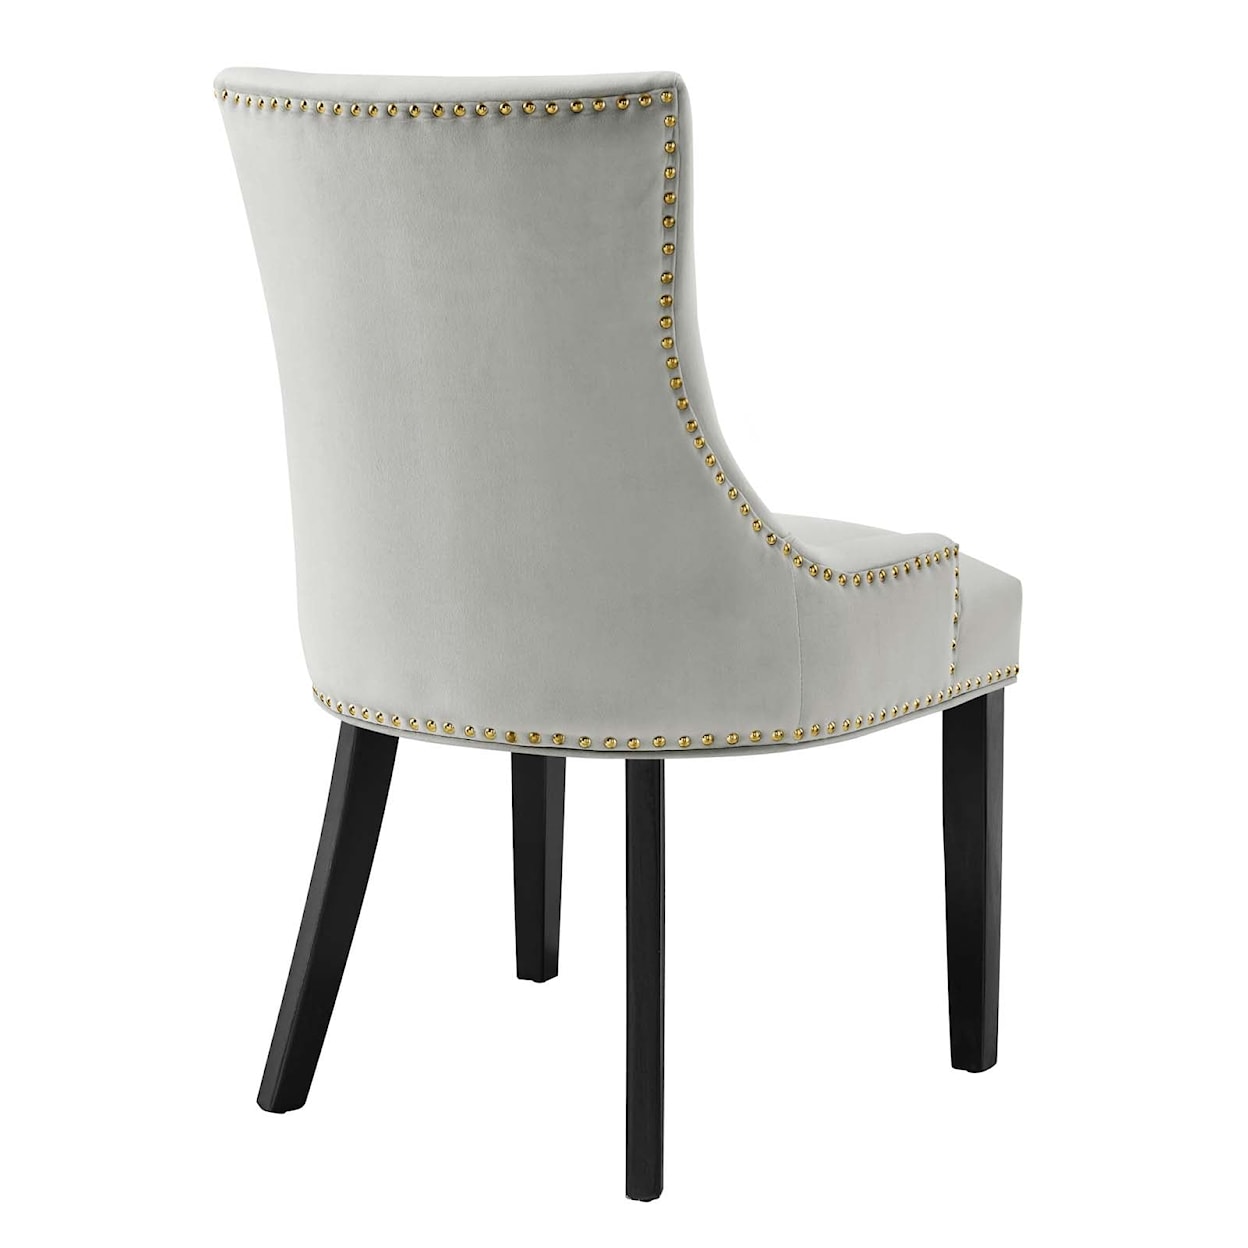 Modway Marquis Marquis Velvet Dining Chairs - Set of 2